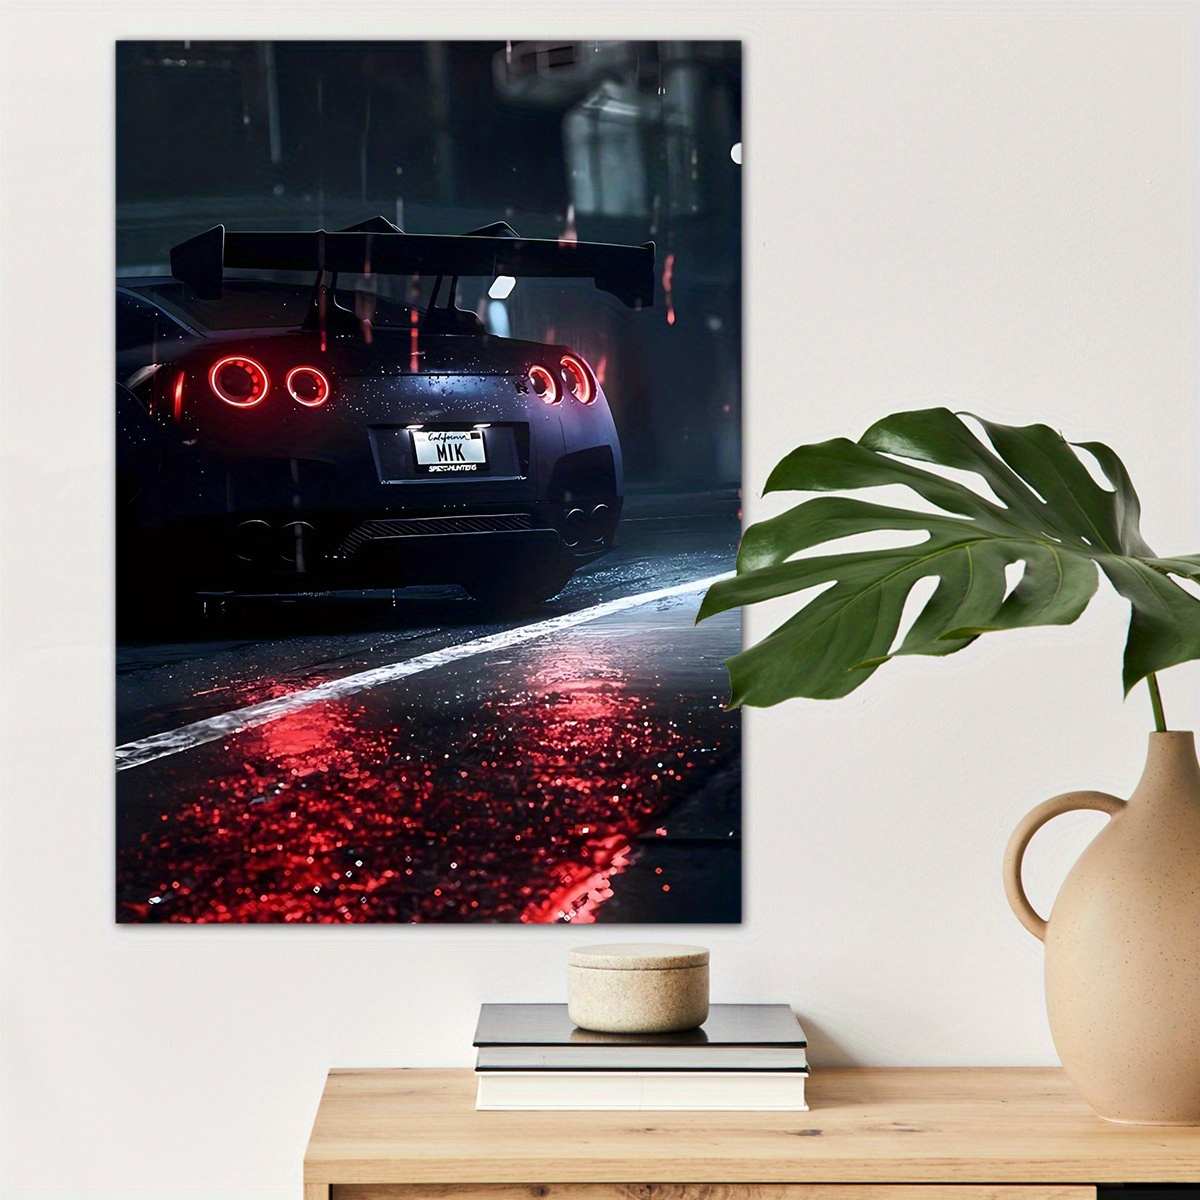 

1pc Back Of A Car Poster Canvas Wall Art For Home Decor, Car Lovers Poster Wall Decor Roadster Canvas Prints For Living Room Bedroom Kitchen Office Cafe Decor, Perfect Gift And Decoration